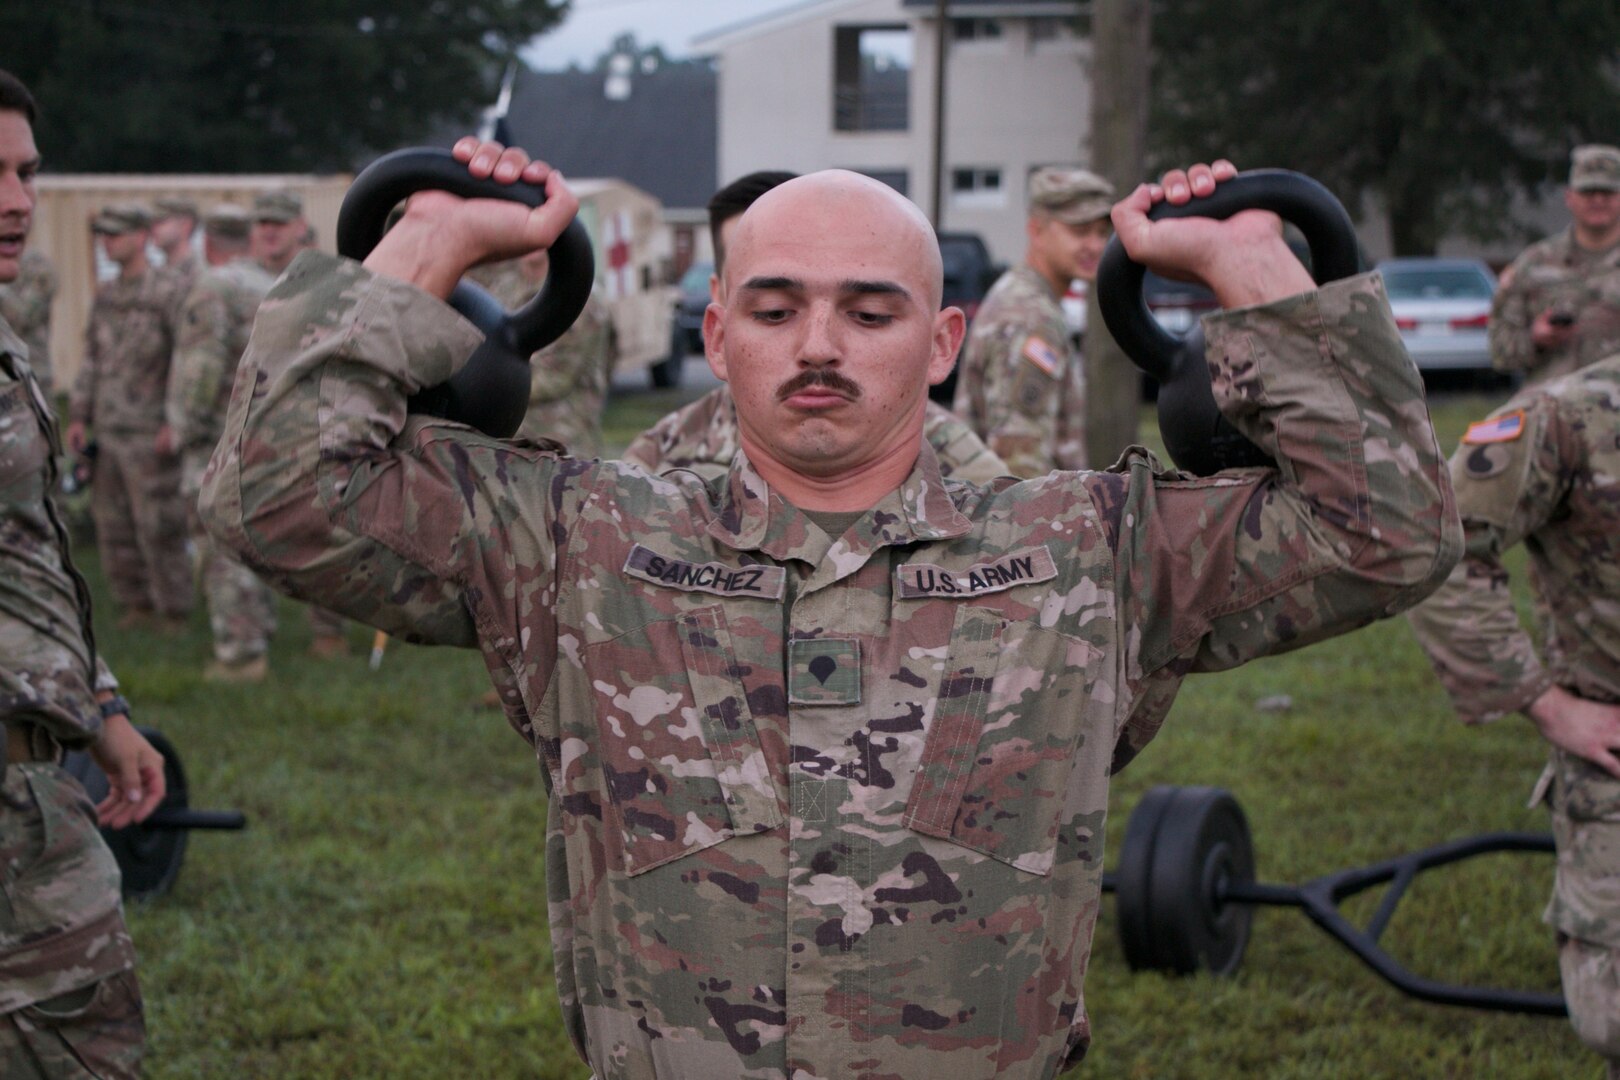 St. Lo Soldiers honor heritage during “Chubby Cup” competition